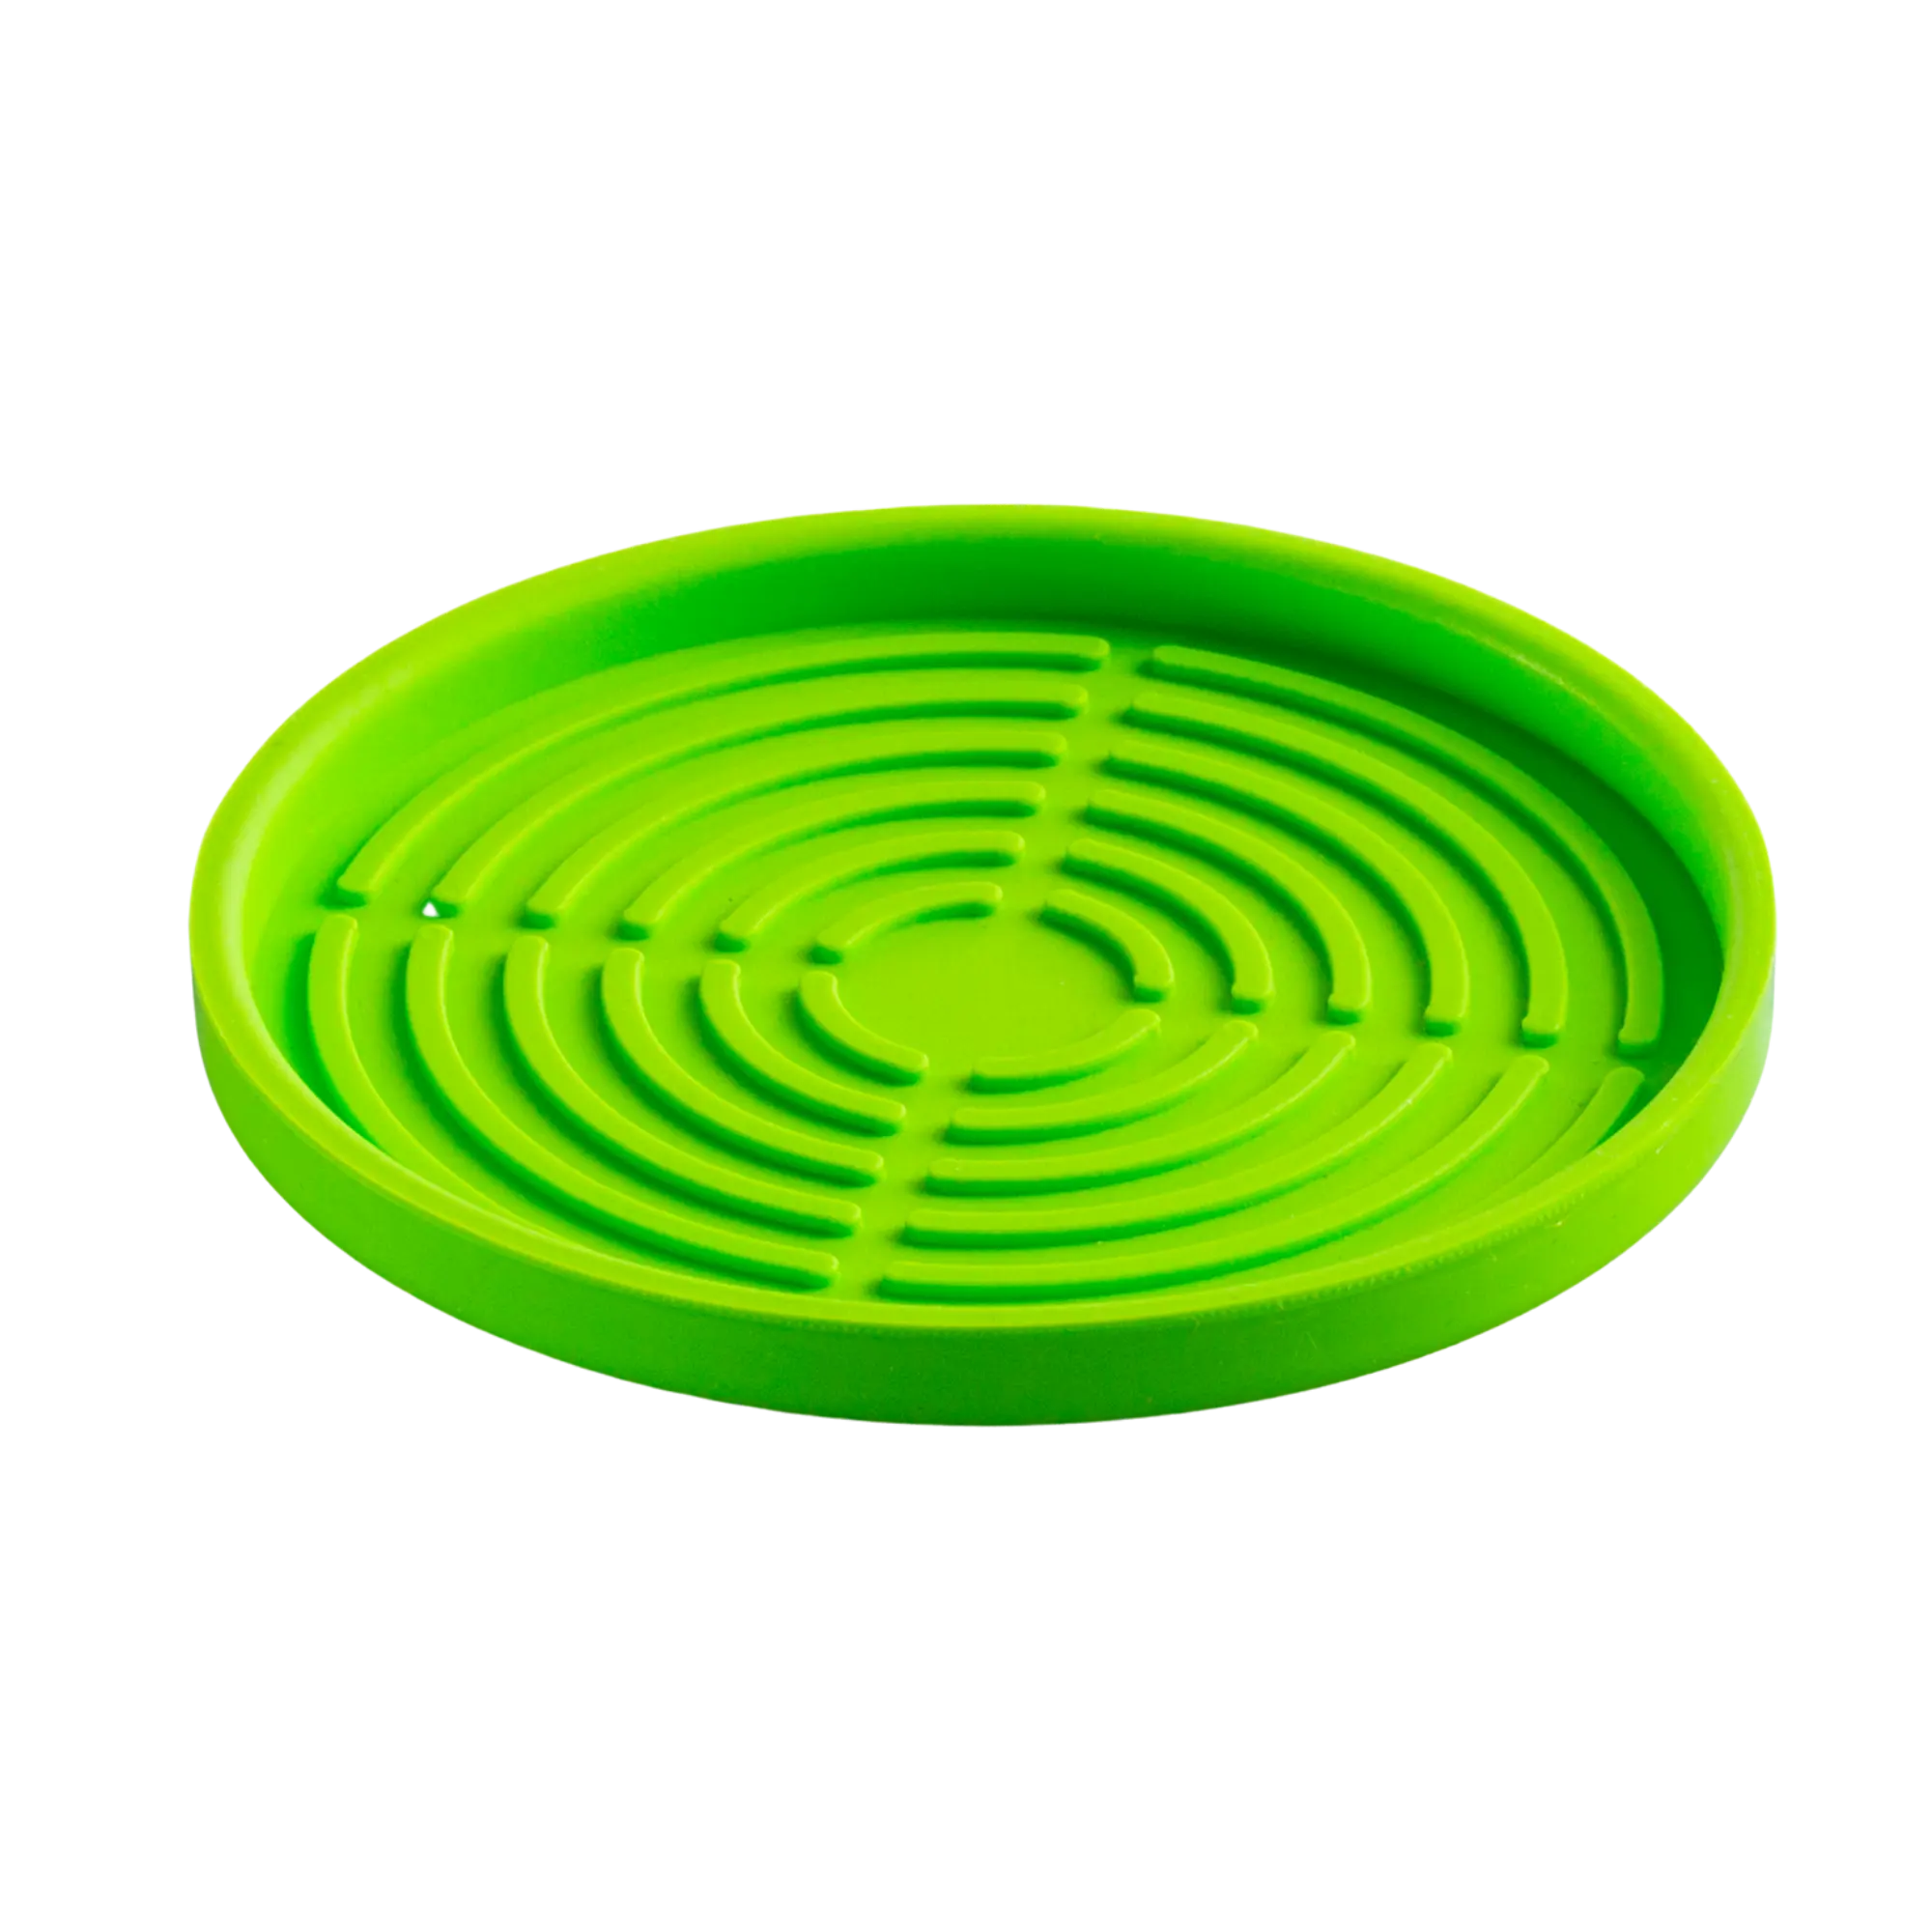 Cheap Price Vietnam Product Wholesale Customized Soft Round Silicone Cup Coaster Colorful For Drink Water